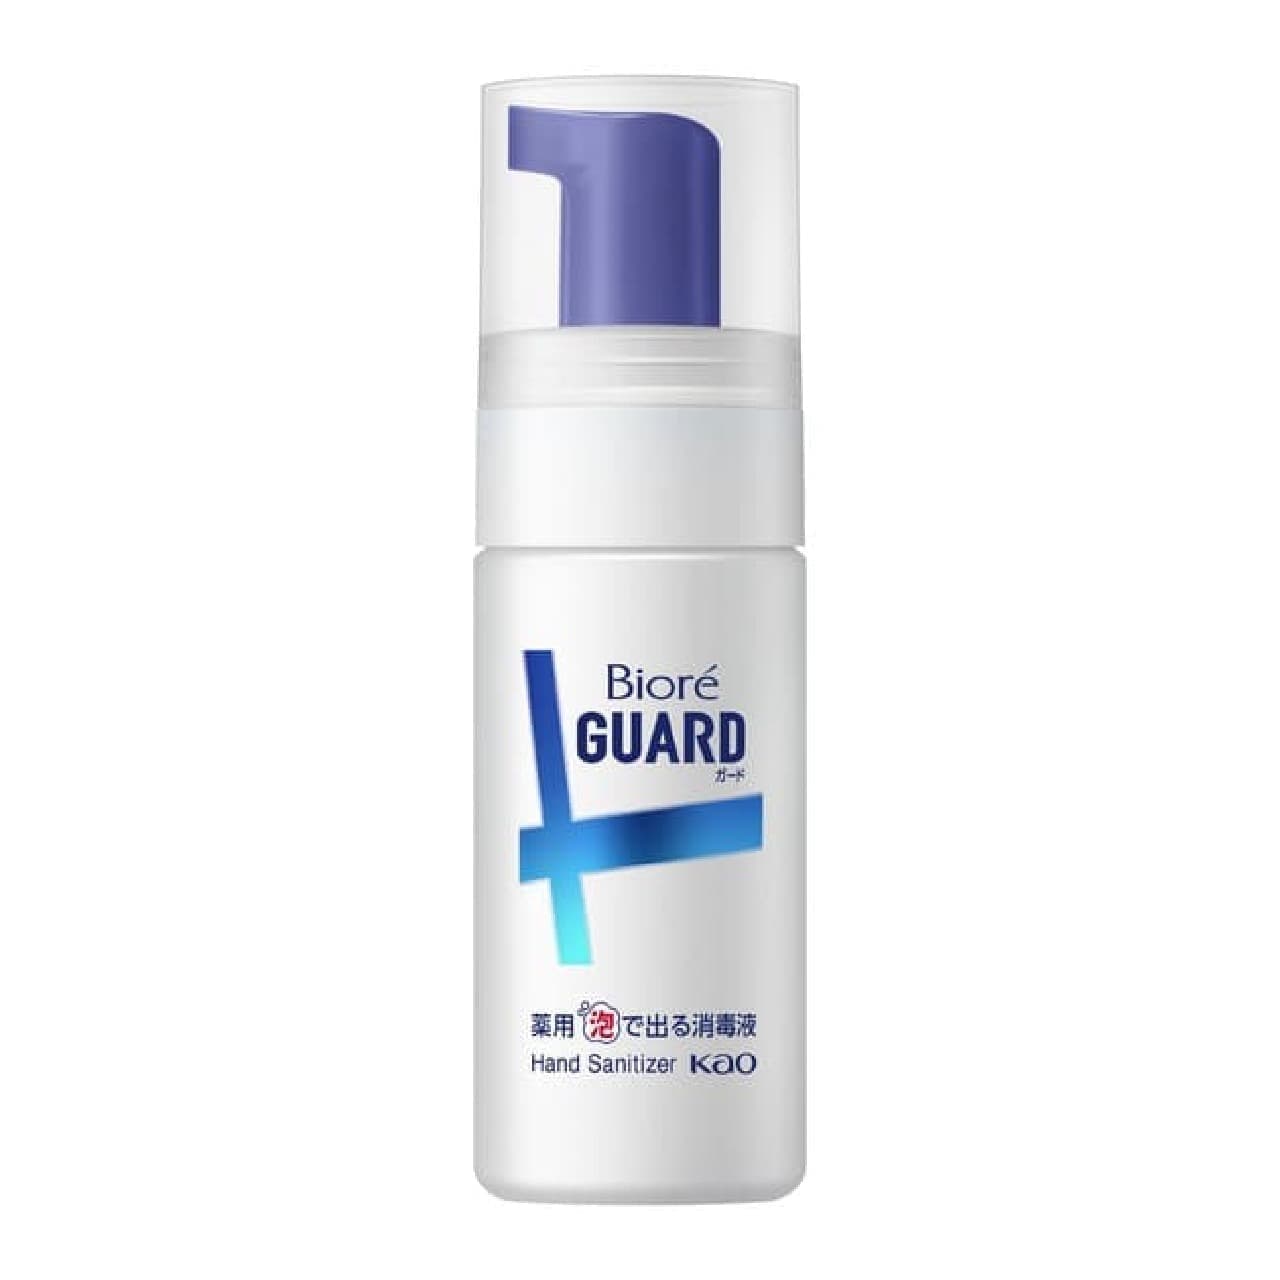 "Biore Guard Medicinal Foam Disinfectant Portable" Non-scattering & non-greasy for hand disinfection on the go